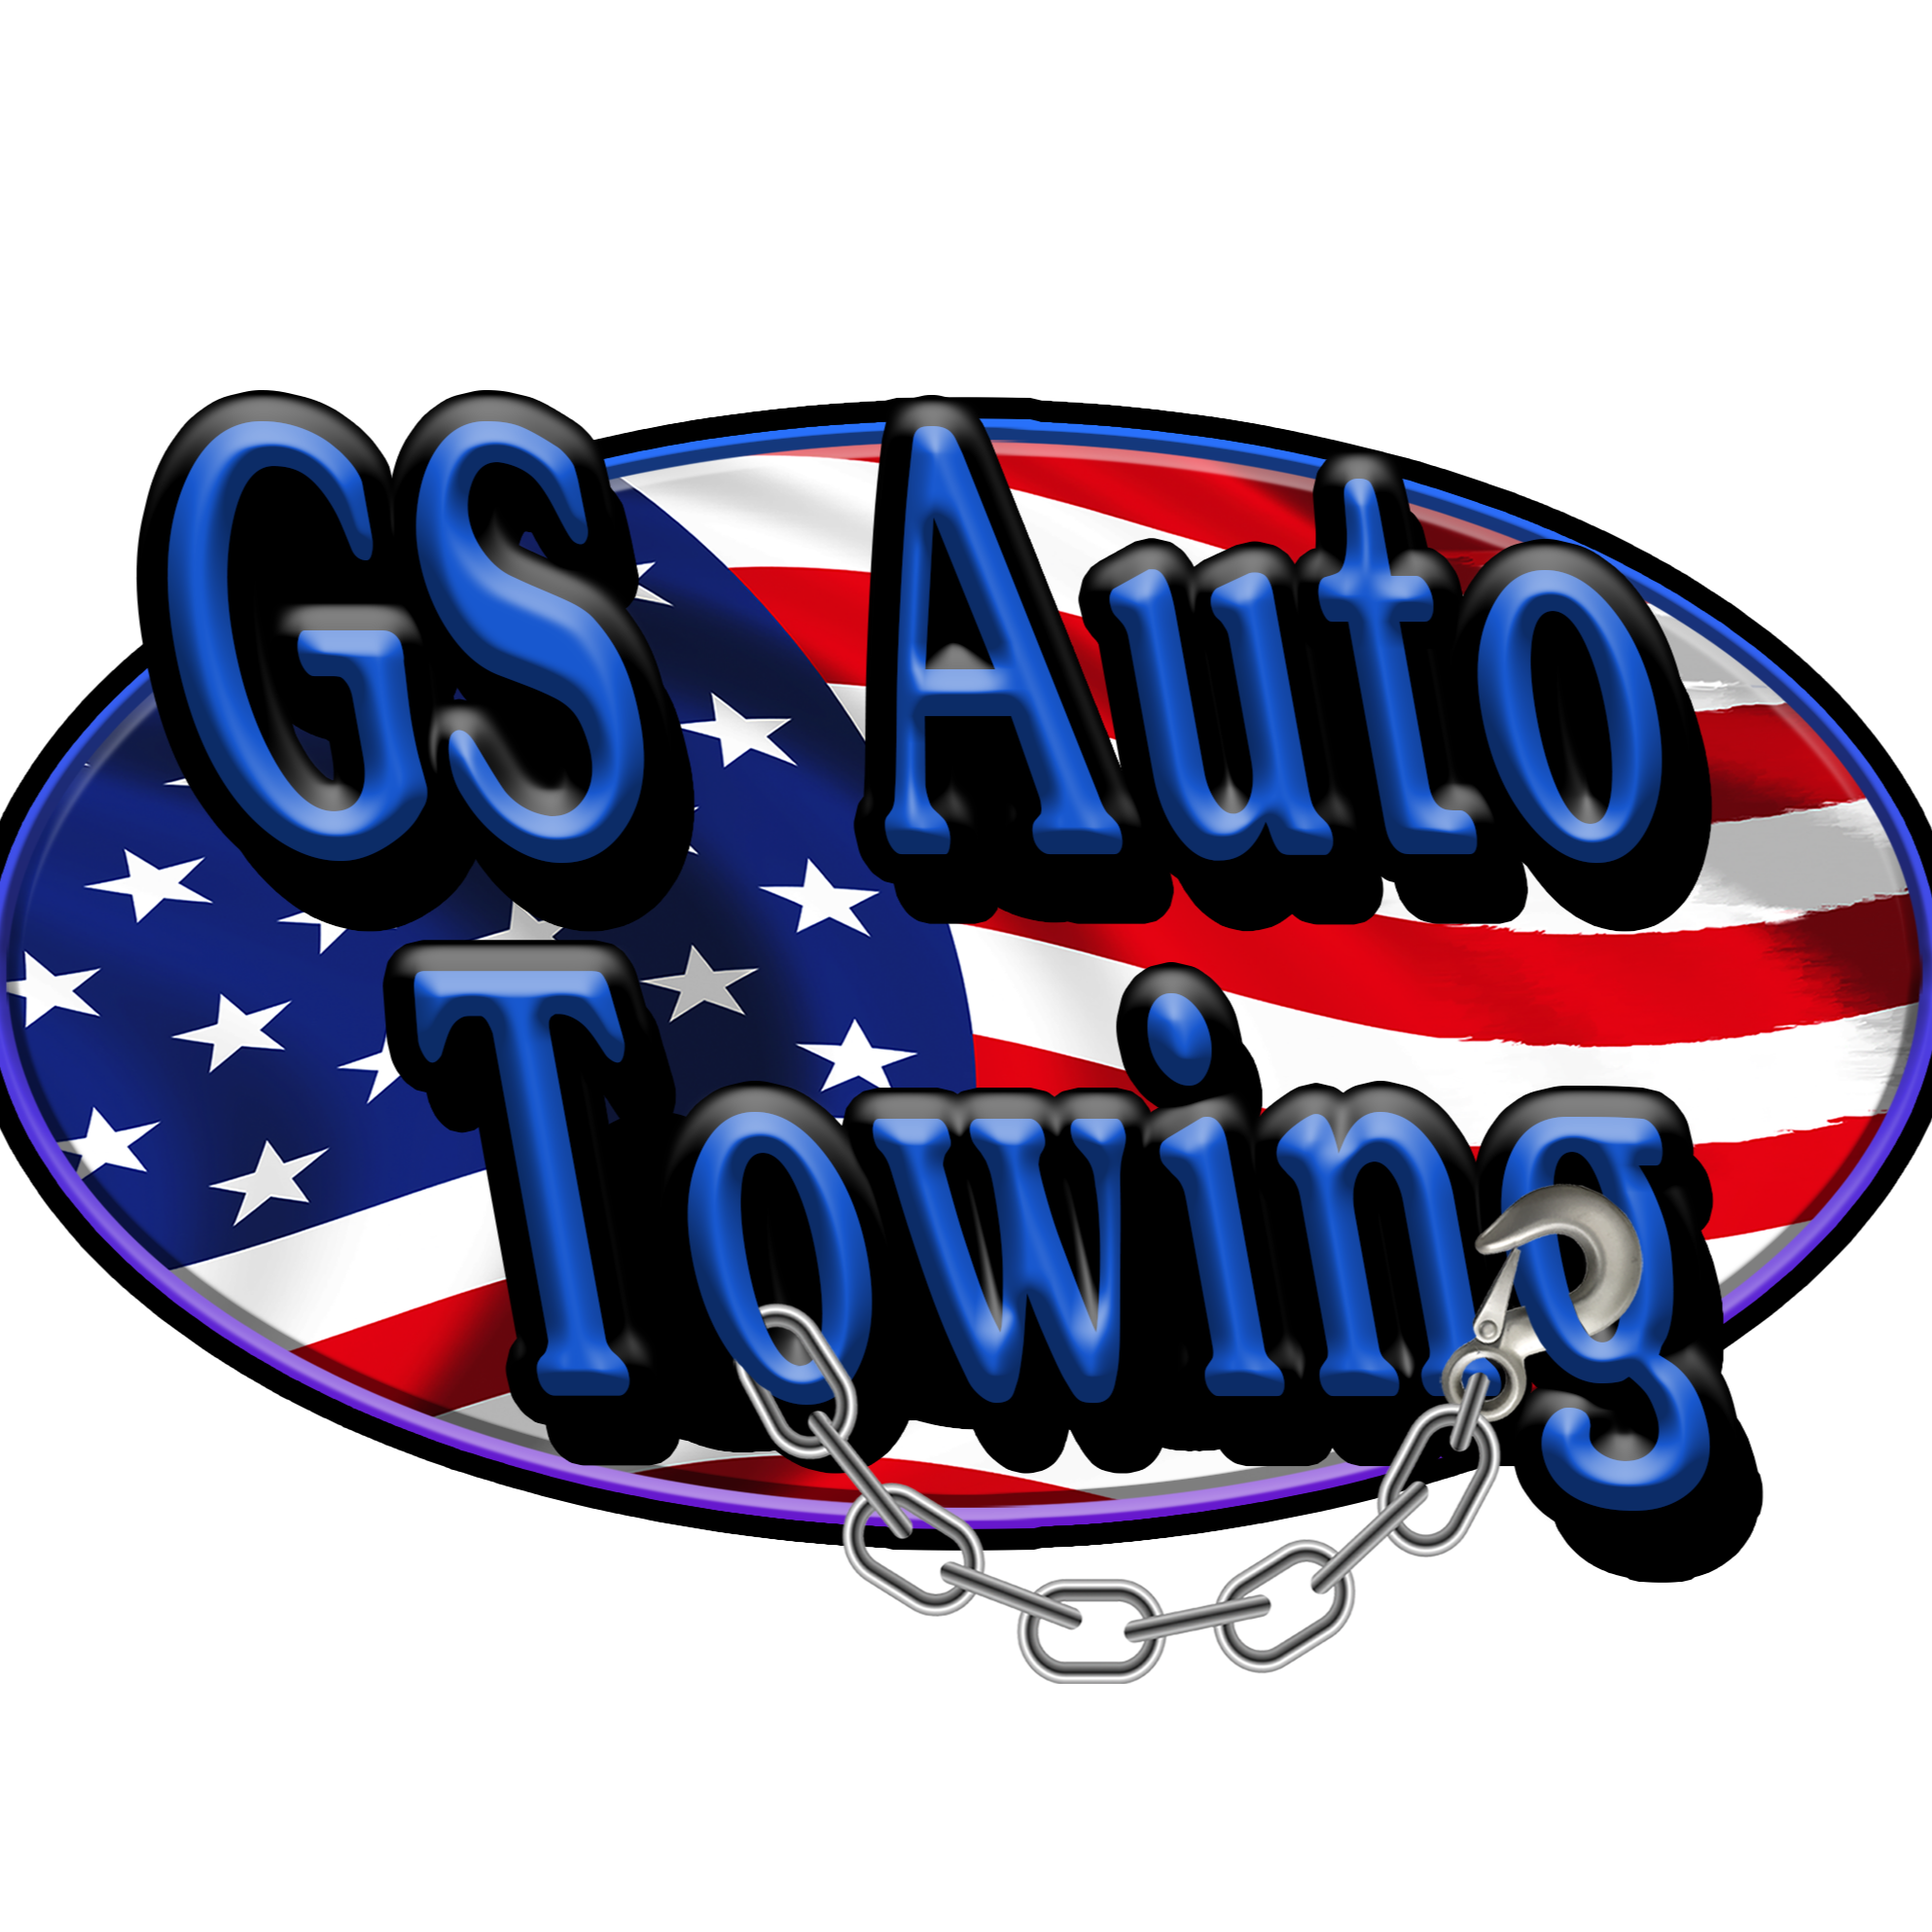 GS Auto Towing & Recovery  logo